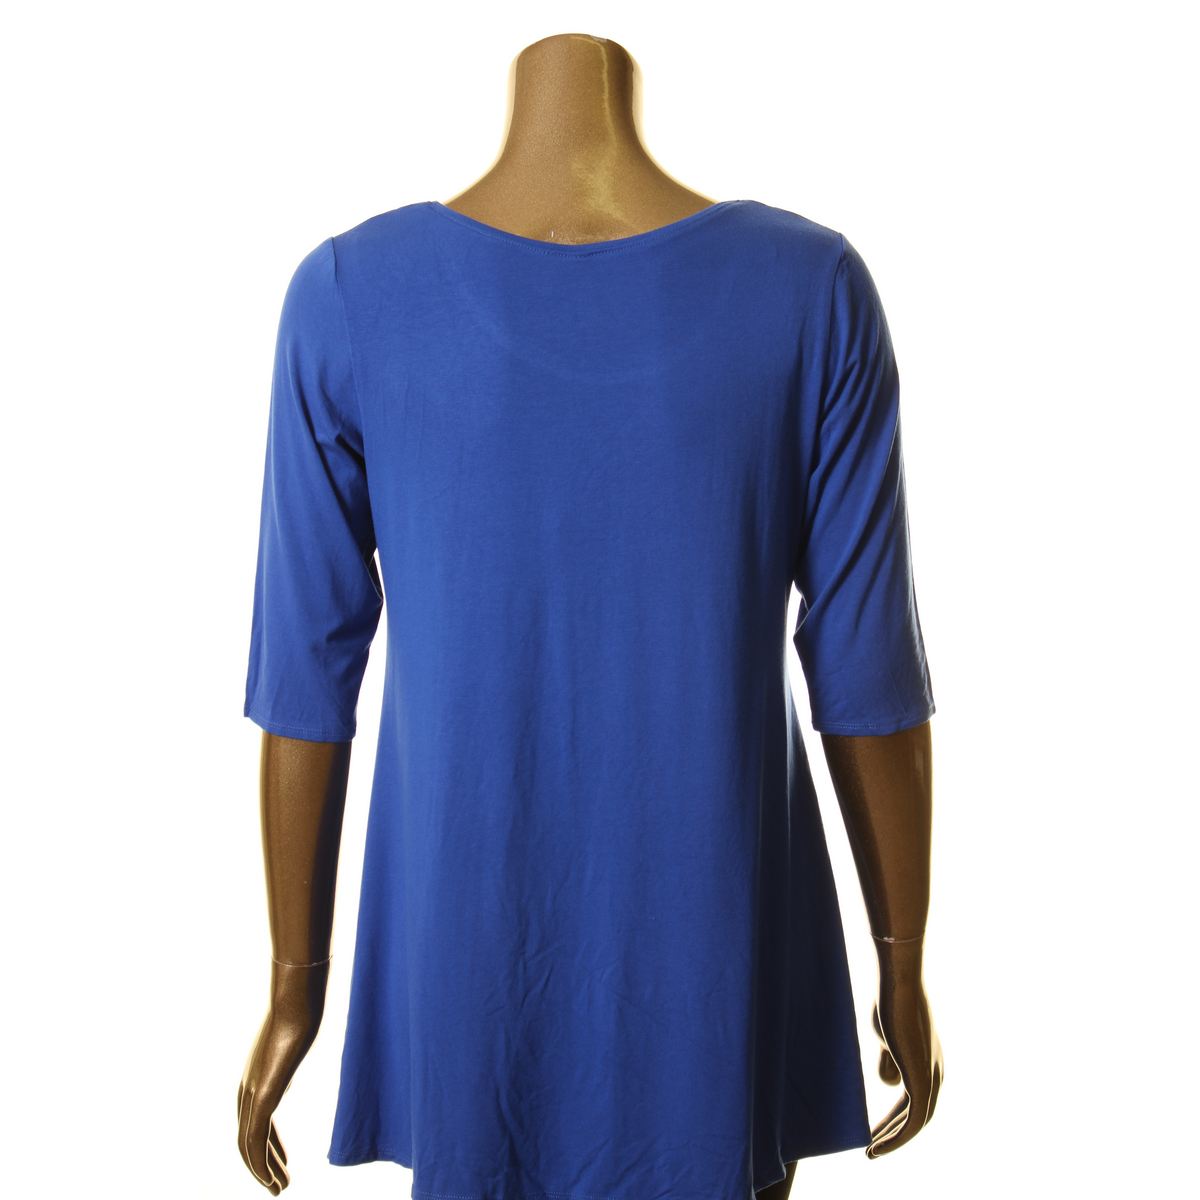 Beatrix OST Ladies 3/4 Sleeve Tunic Top Blue Size S for sale online | eBay